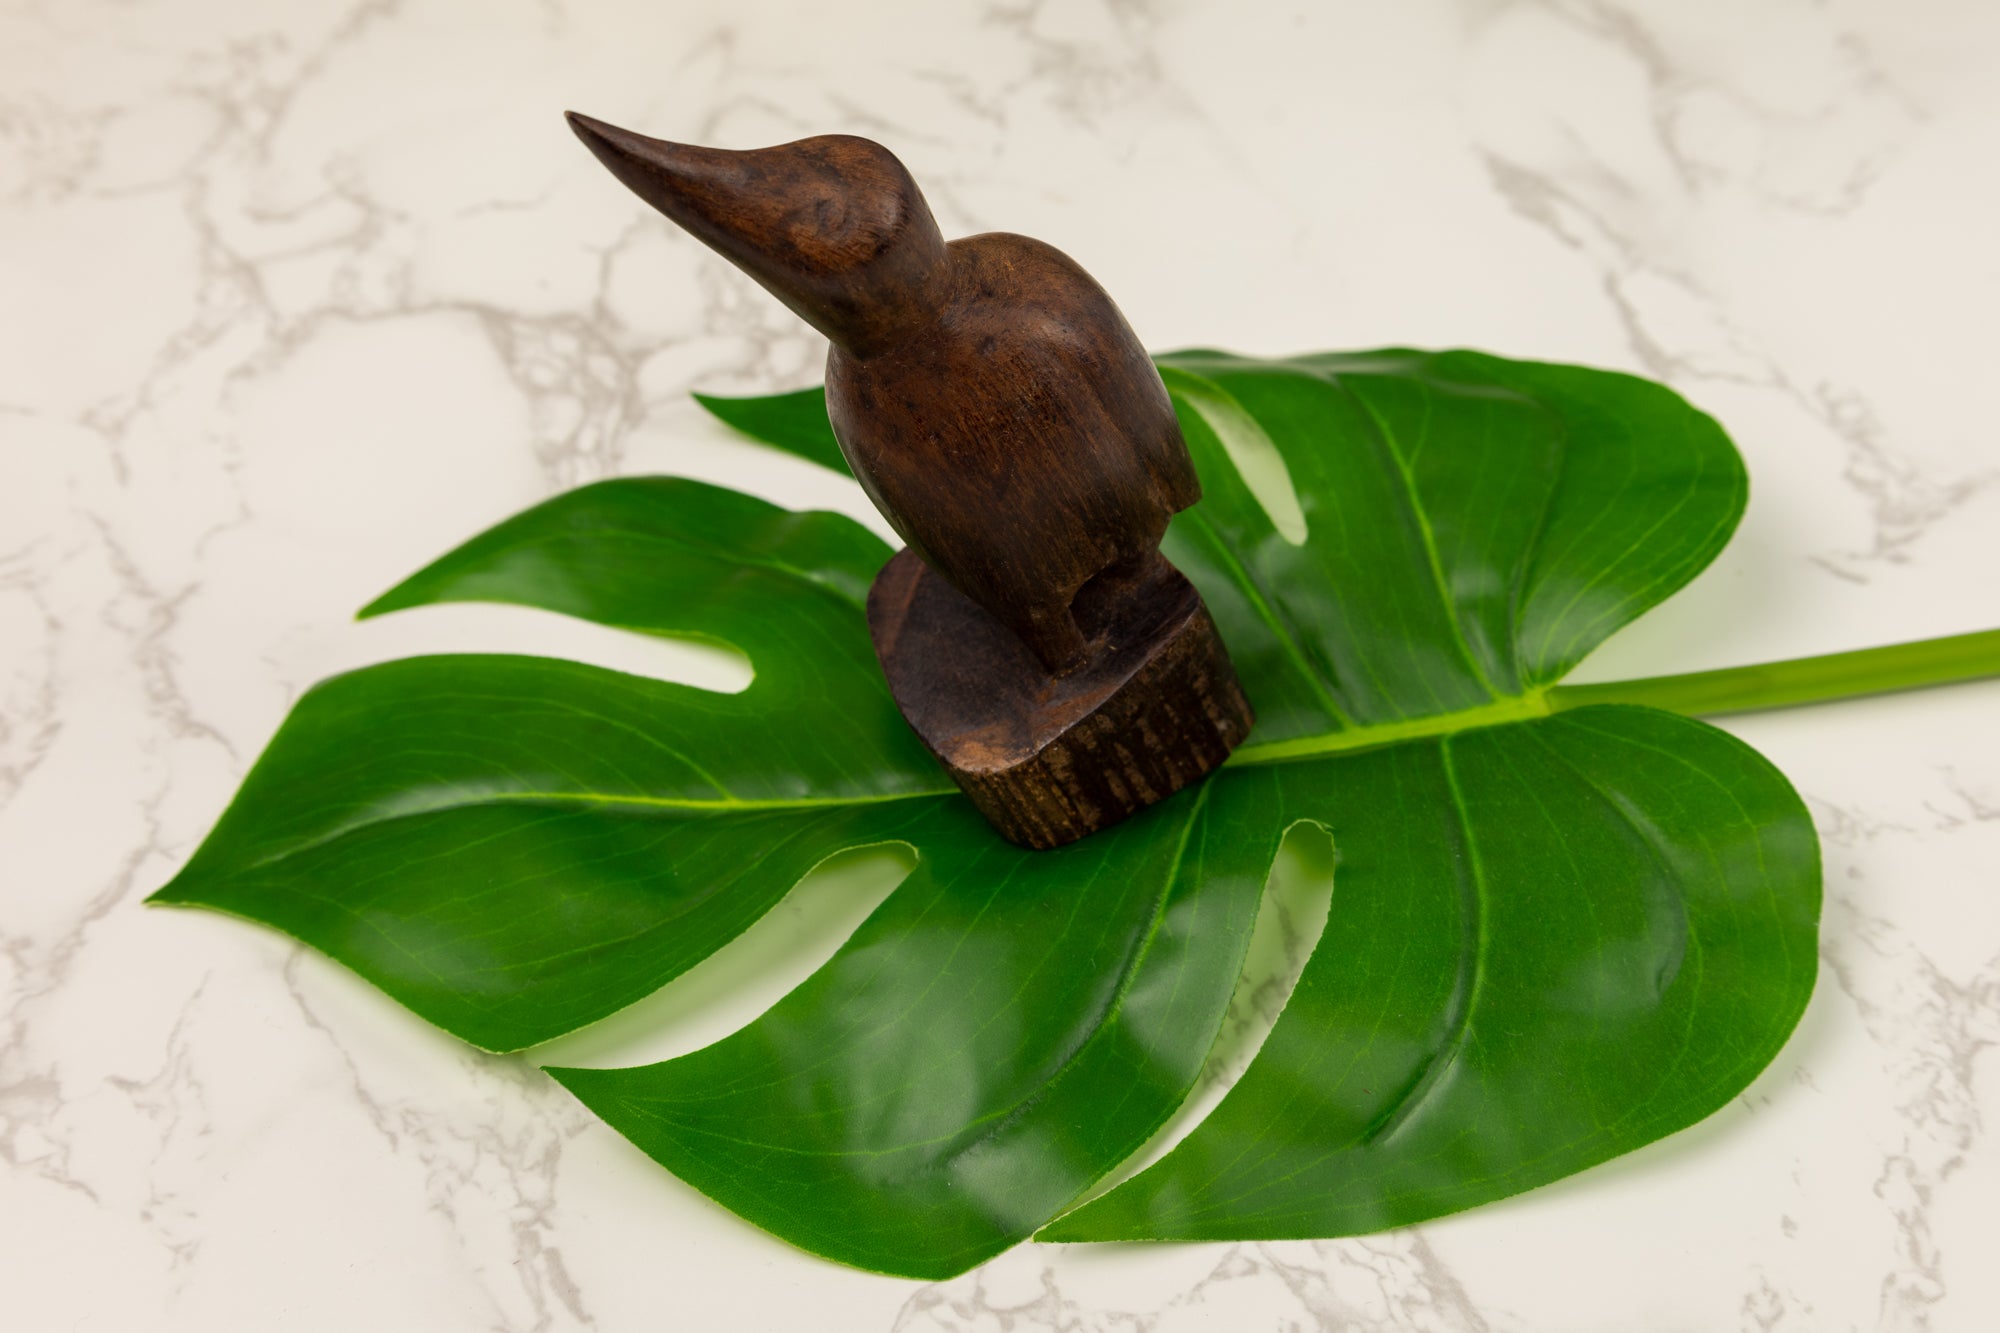 Jungle Fly Catcher Figurine, Wood Carving